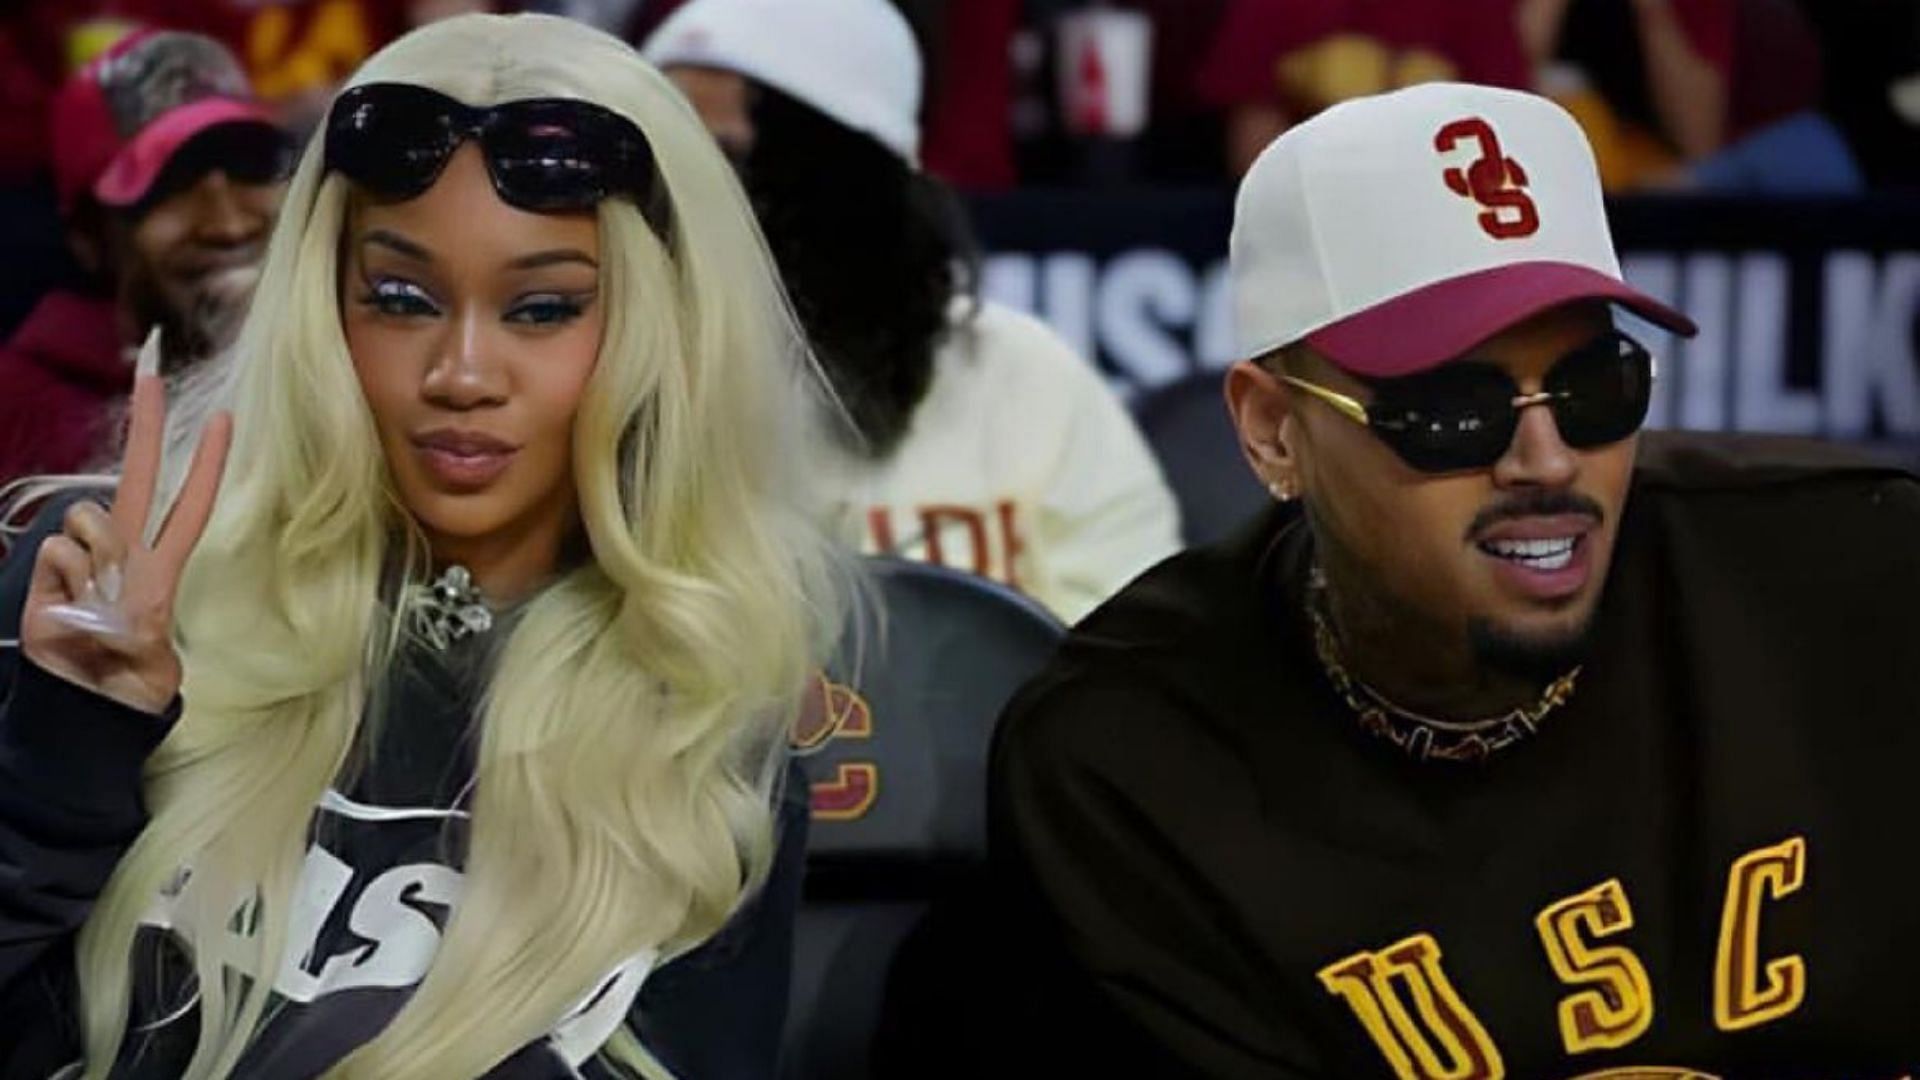 Musicians Saweetie and Chris Brown at a USC basketball game (Image credit: @DailyLoud on Twitter)